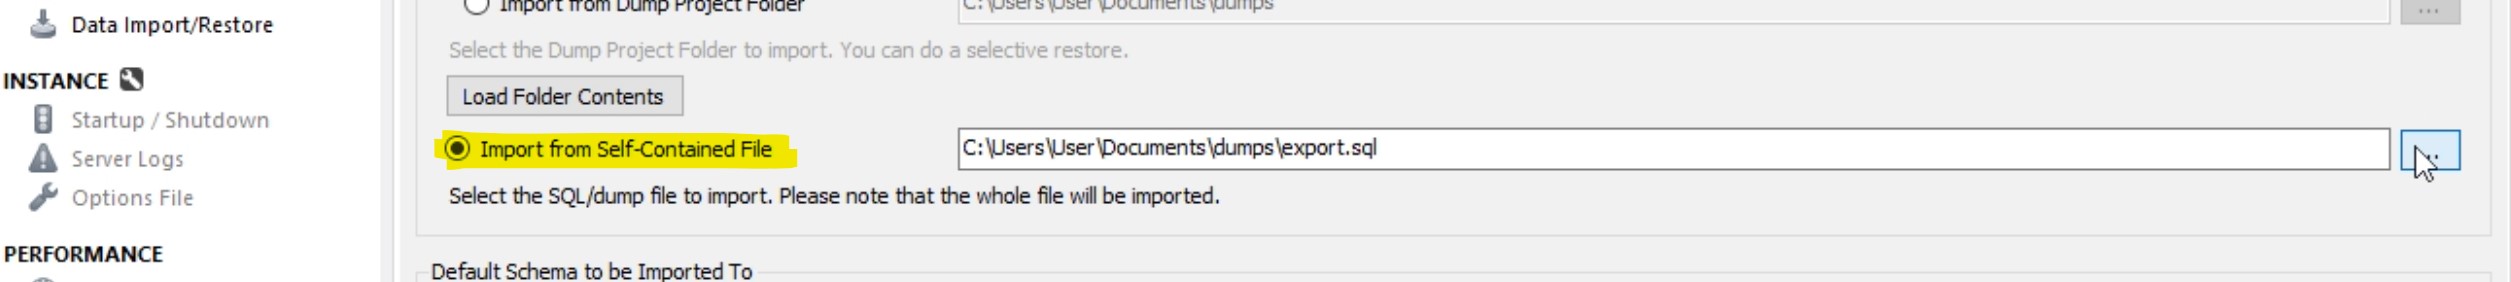 Data Import Restore Self contained file